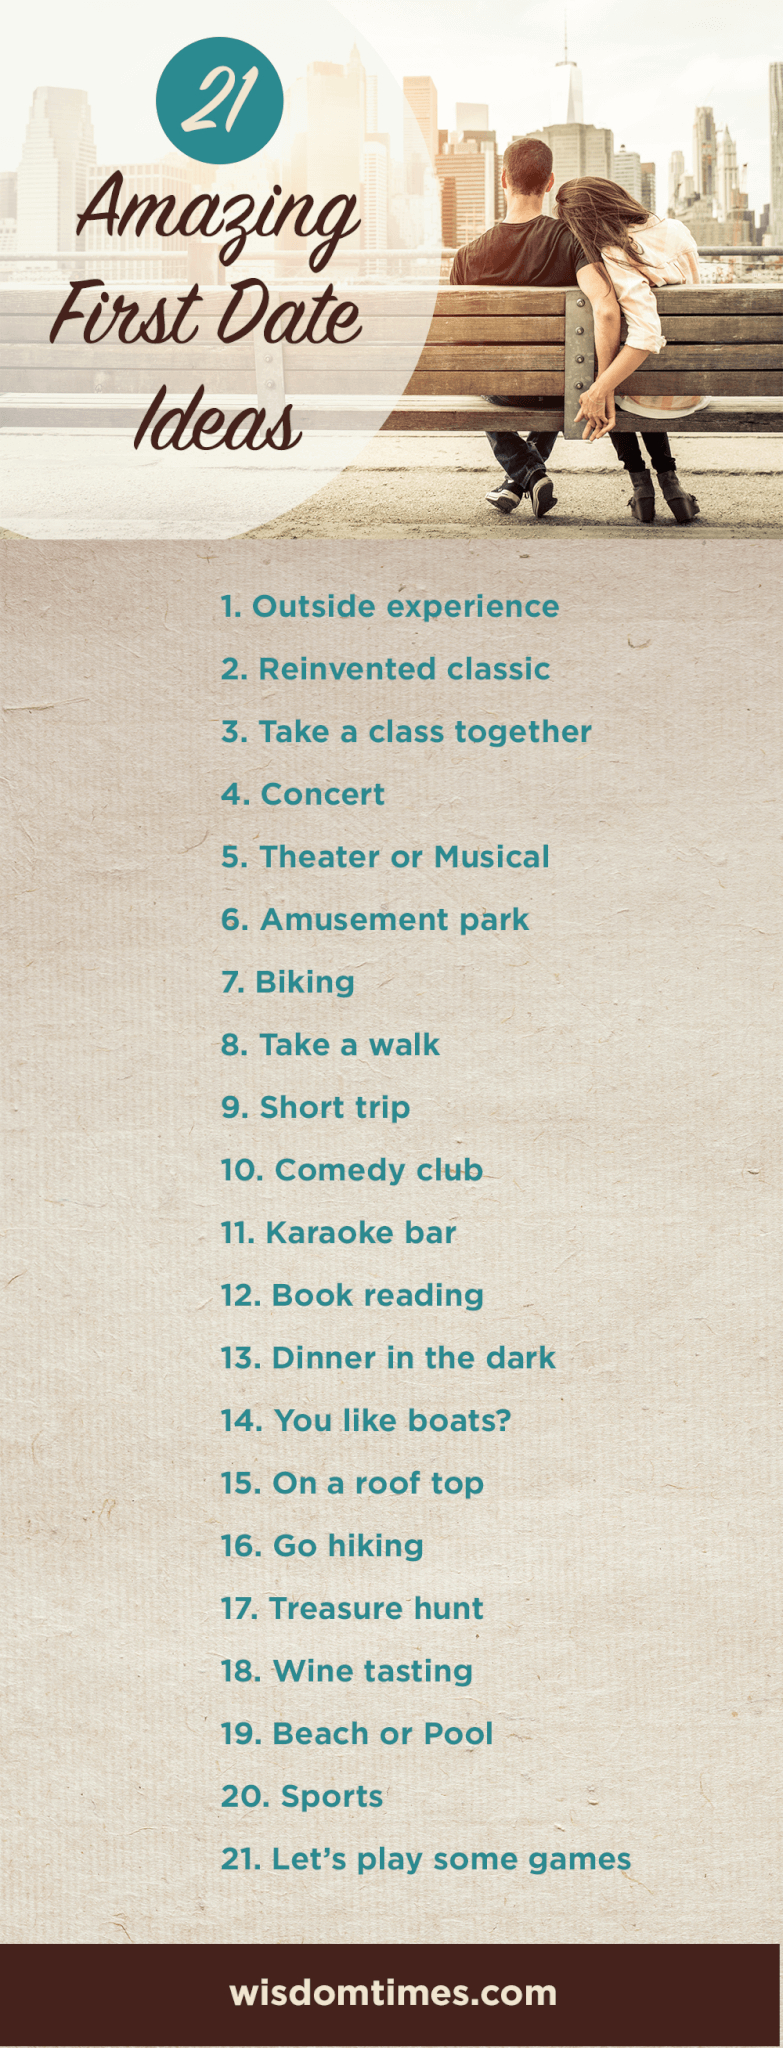 10 Awesome Ideas For A Fun Date 21 amazing first date ideas 2024